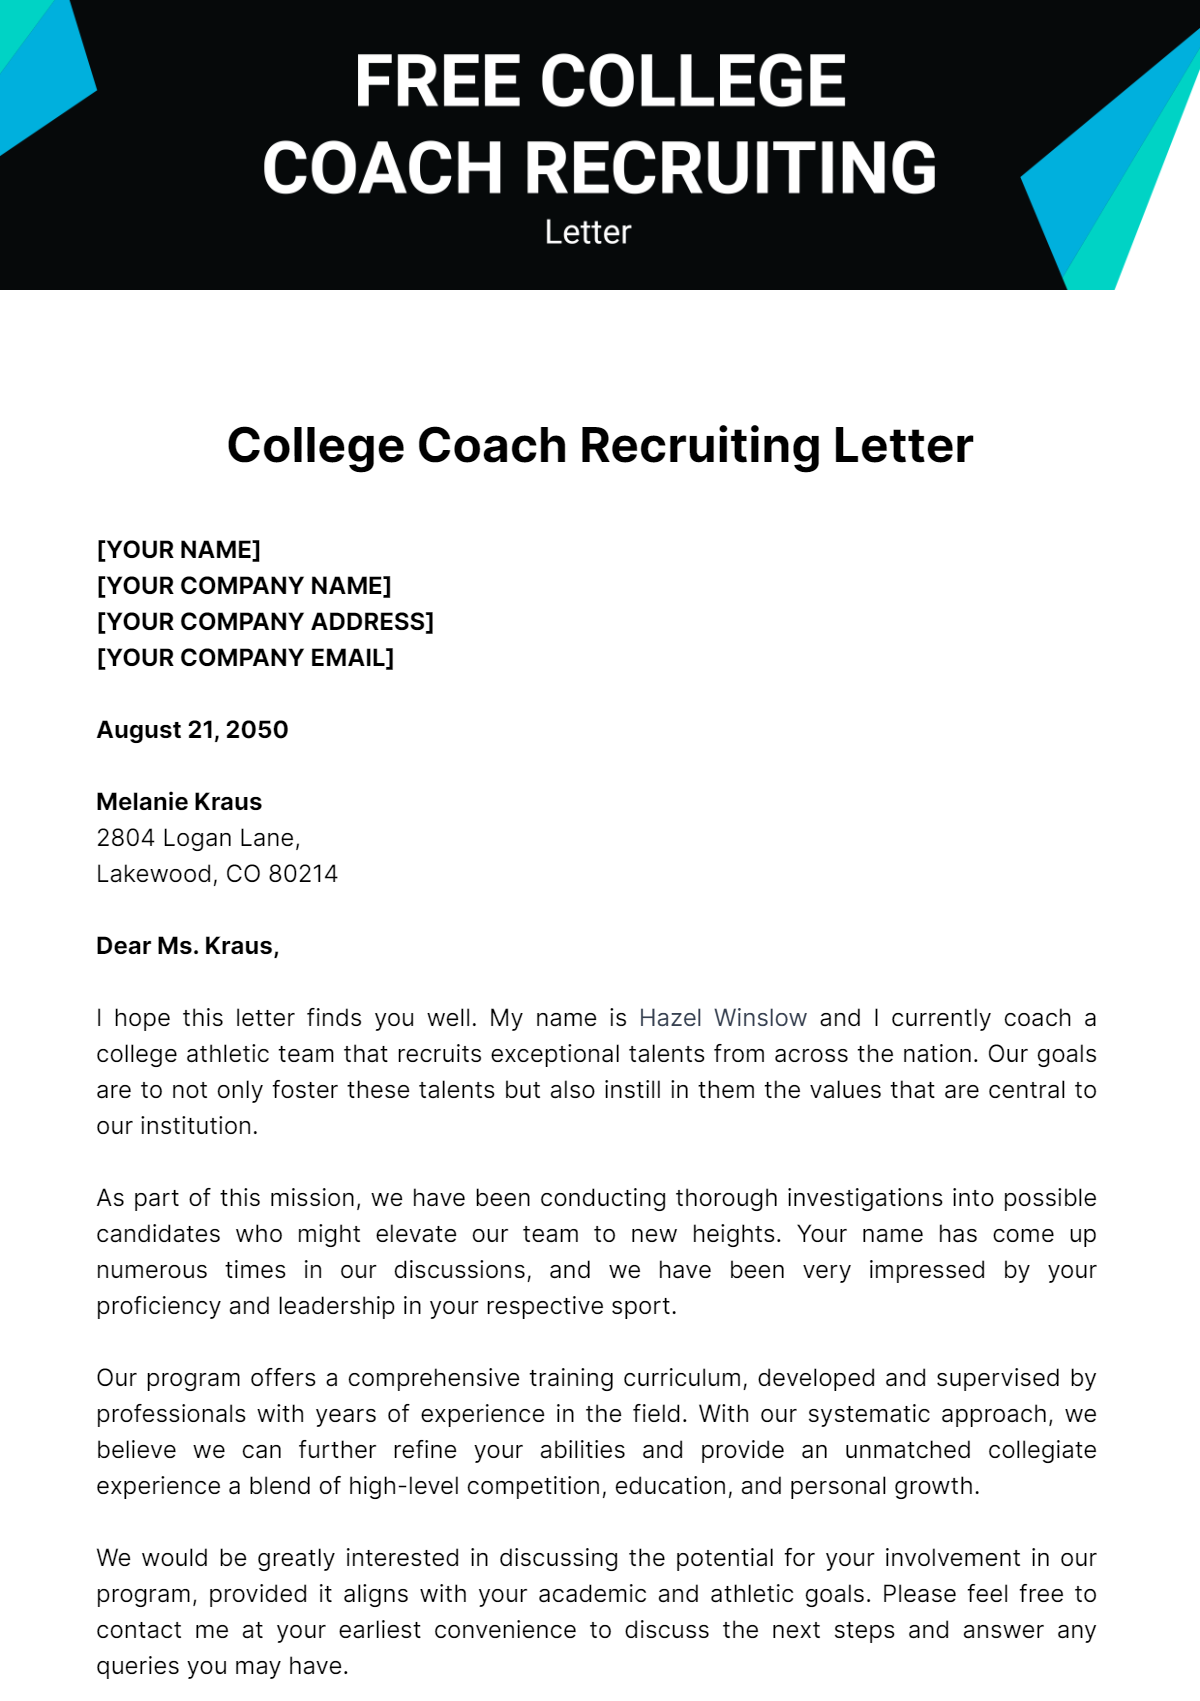 Free College Coach Recruiting Letter template